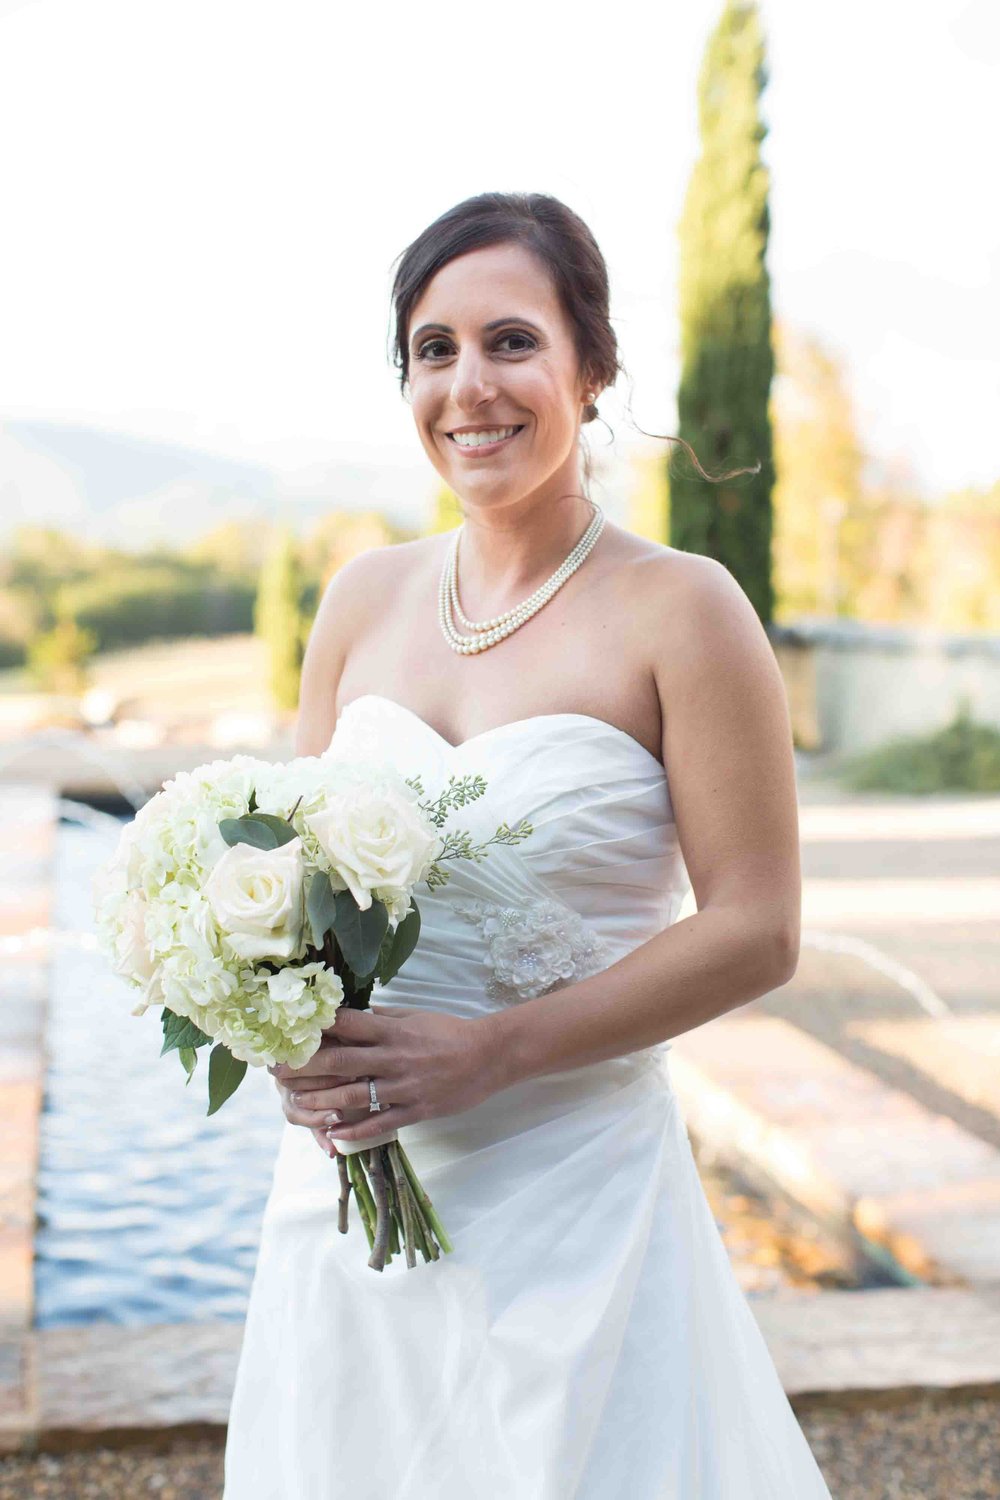 Bride smiling and holding her Bouquet